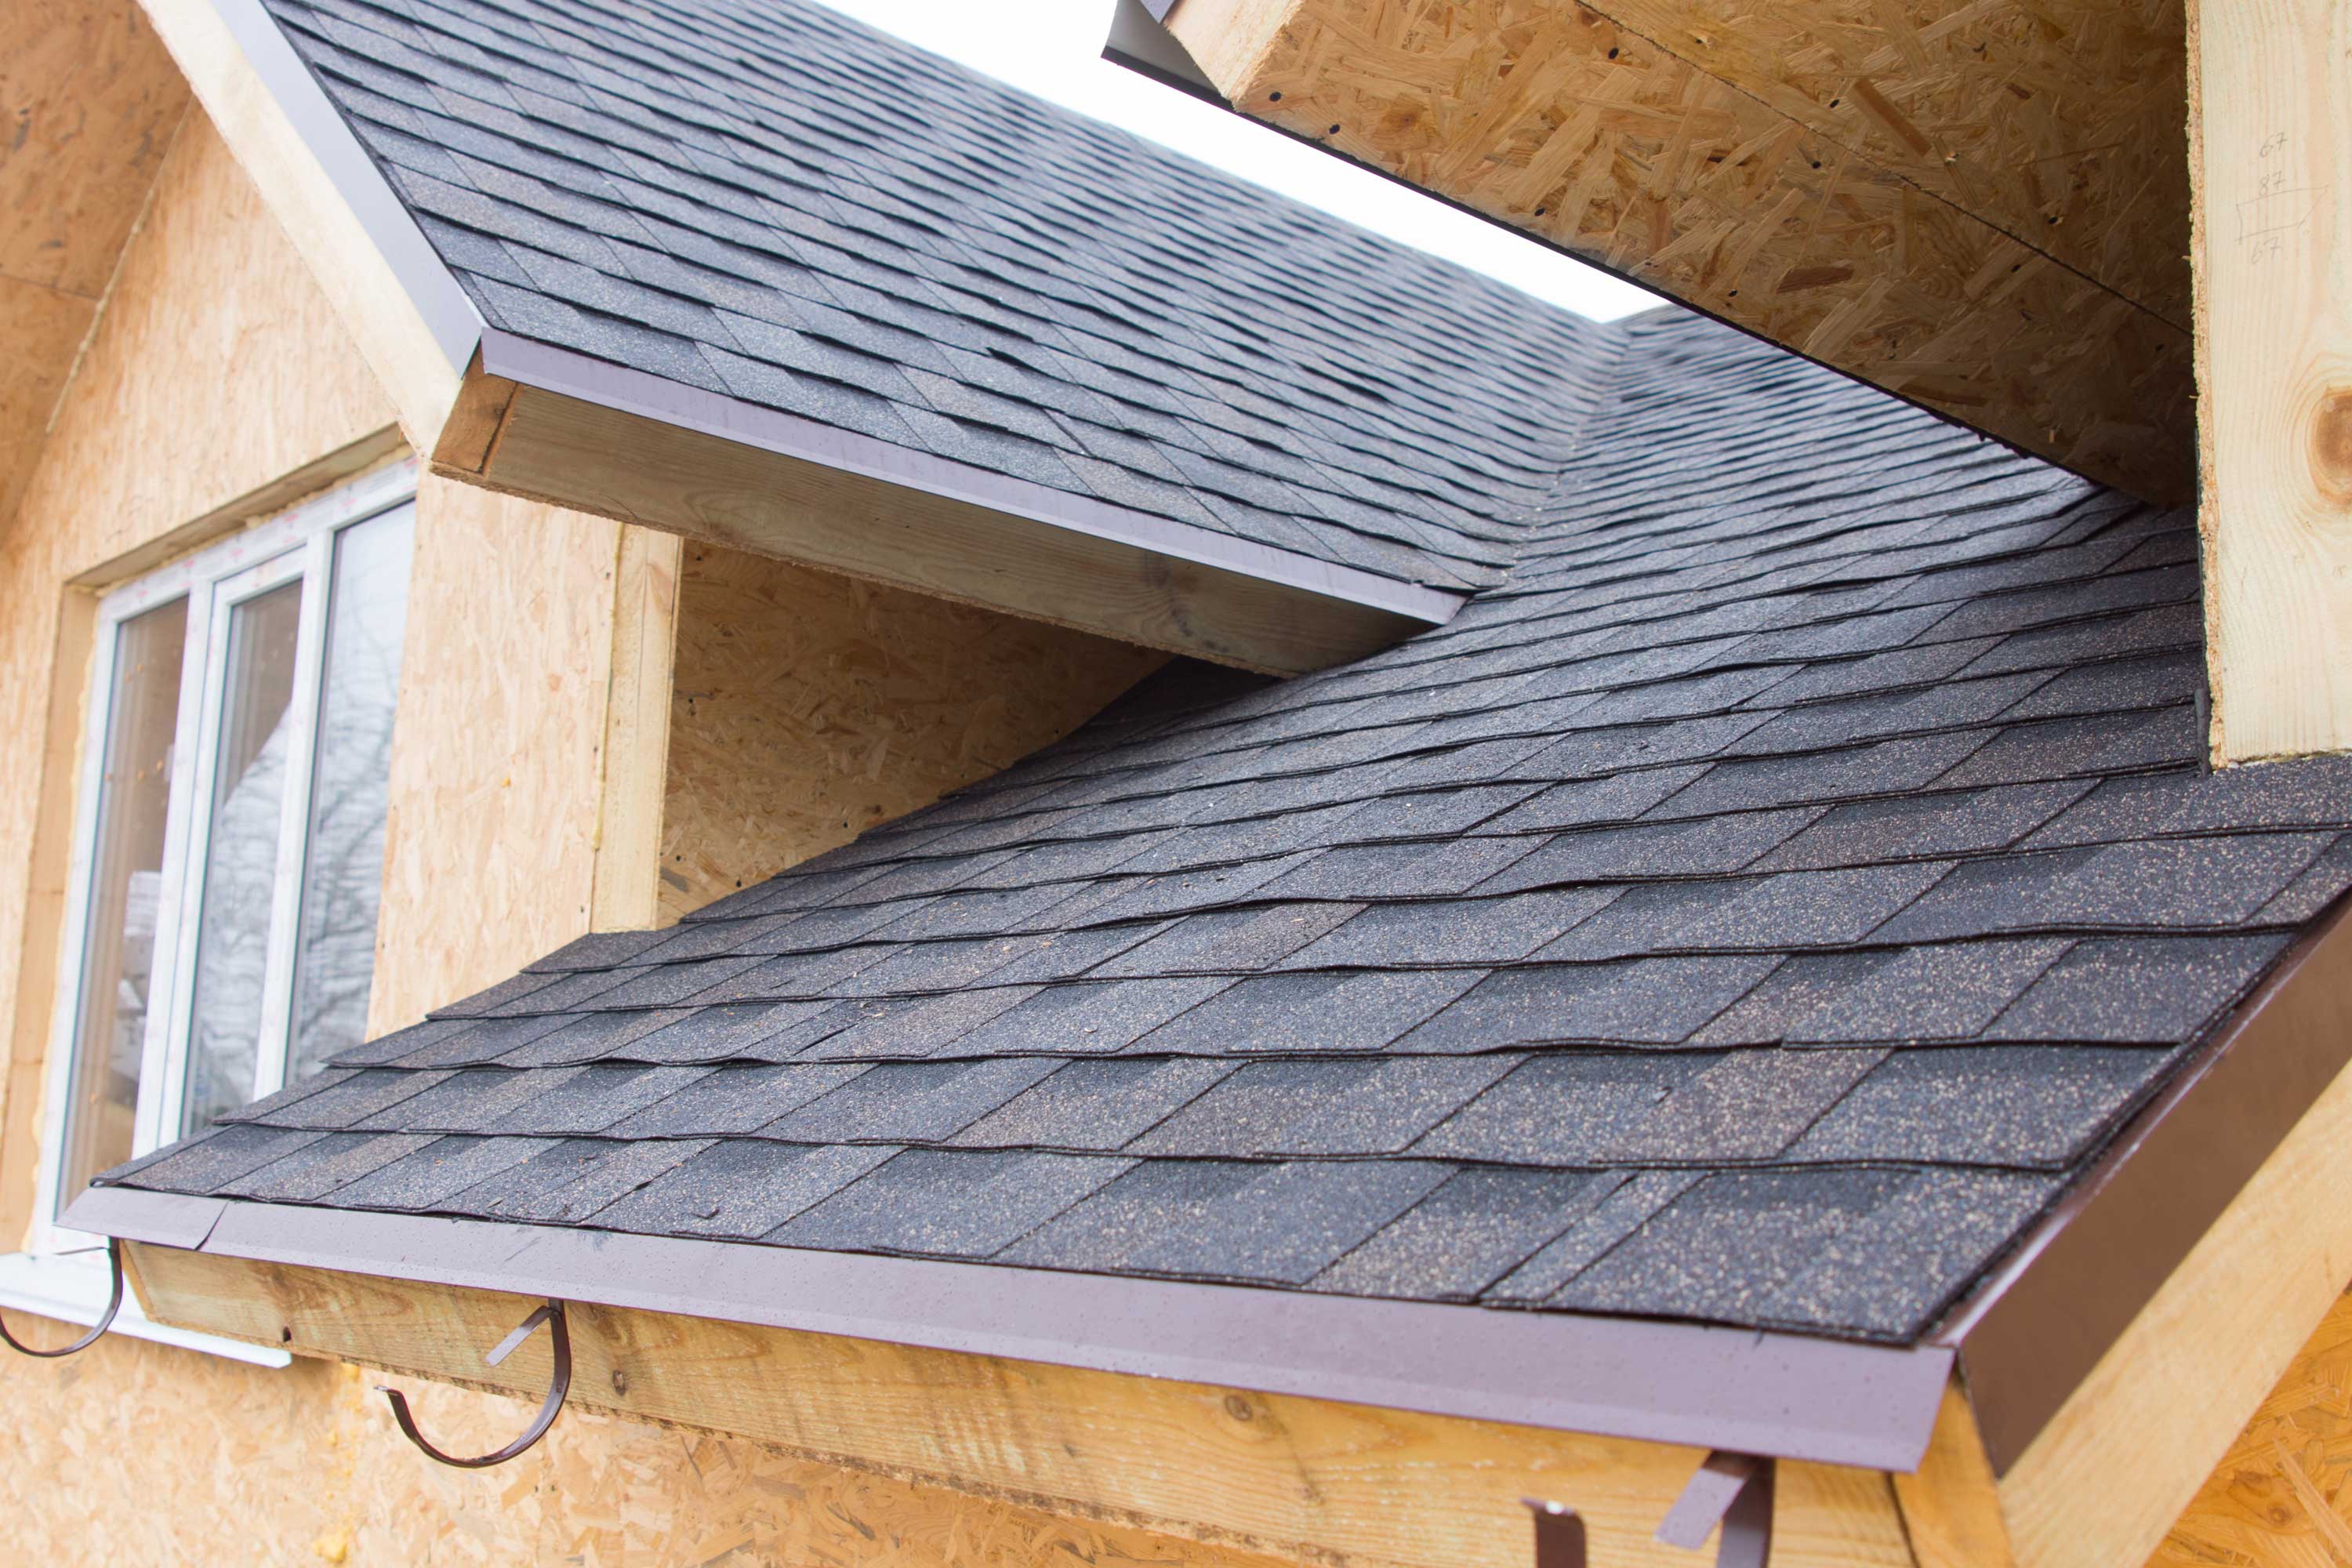 Trusted Local Roofing Contractor in Collegeville, PA